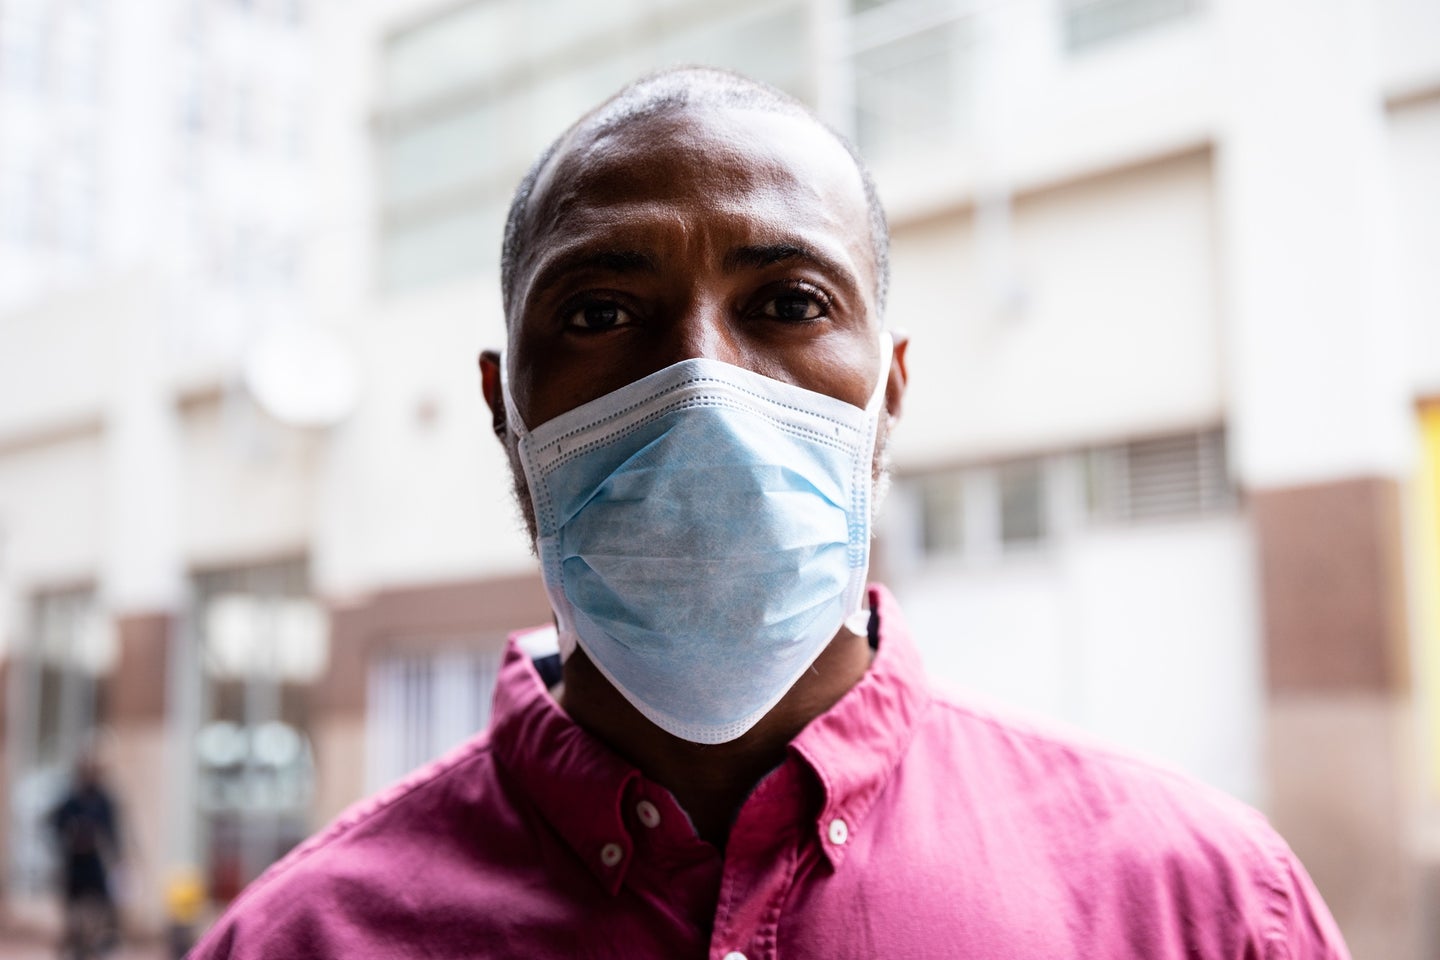 Black person with short gray hair in a red collared shirt wearing a COVID mask looking directly into the camera